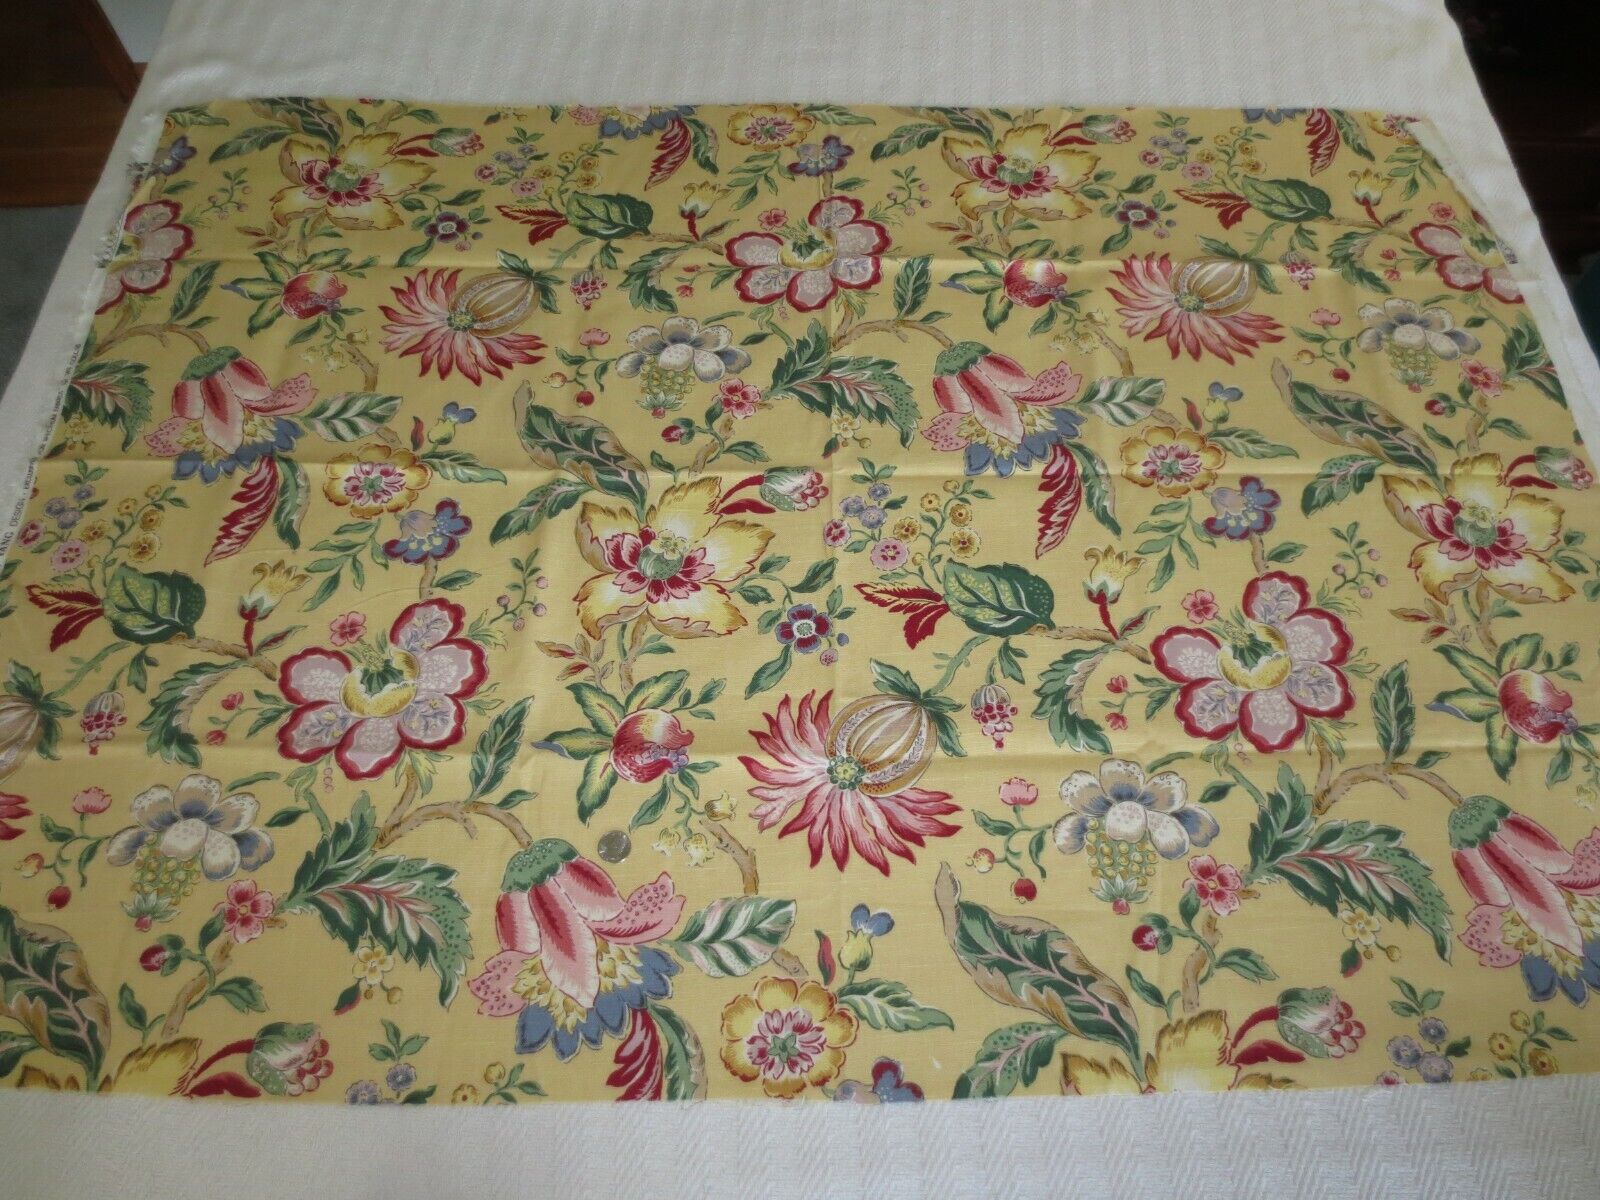 3194.  Jay Yang FLORAL DESIGN Home Decor, Upholstery COTTON FABRIC - 54" x 1 yd.